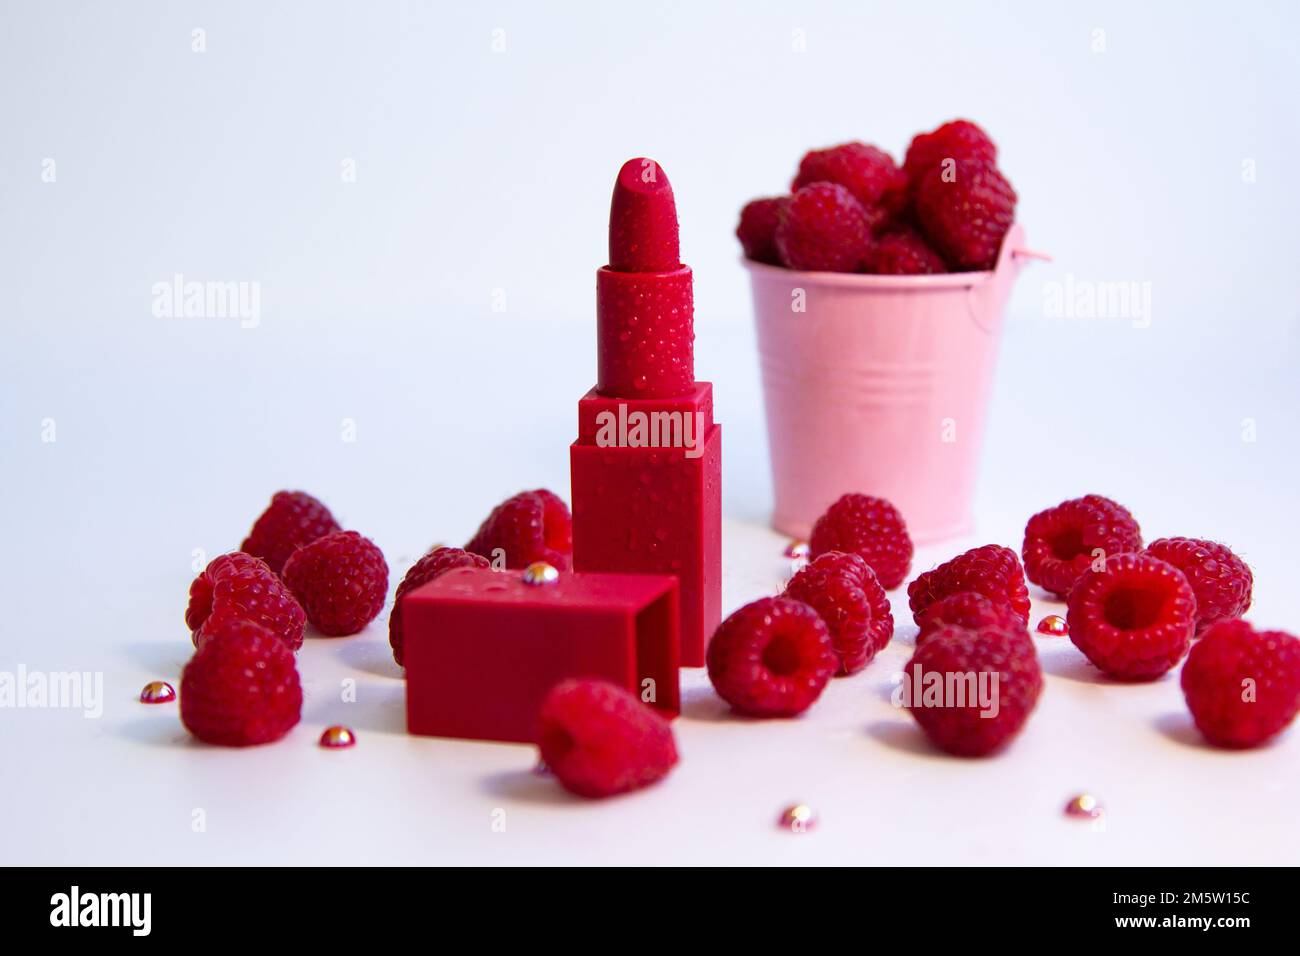 Bright red lipstick and ripe juicy raspberries on white background. Stock Photo